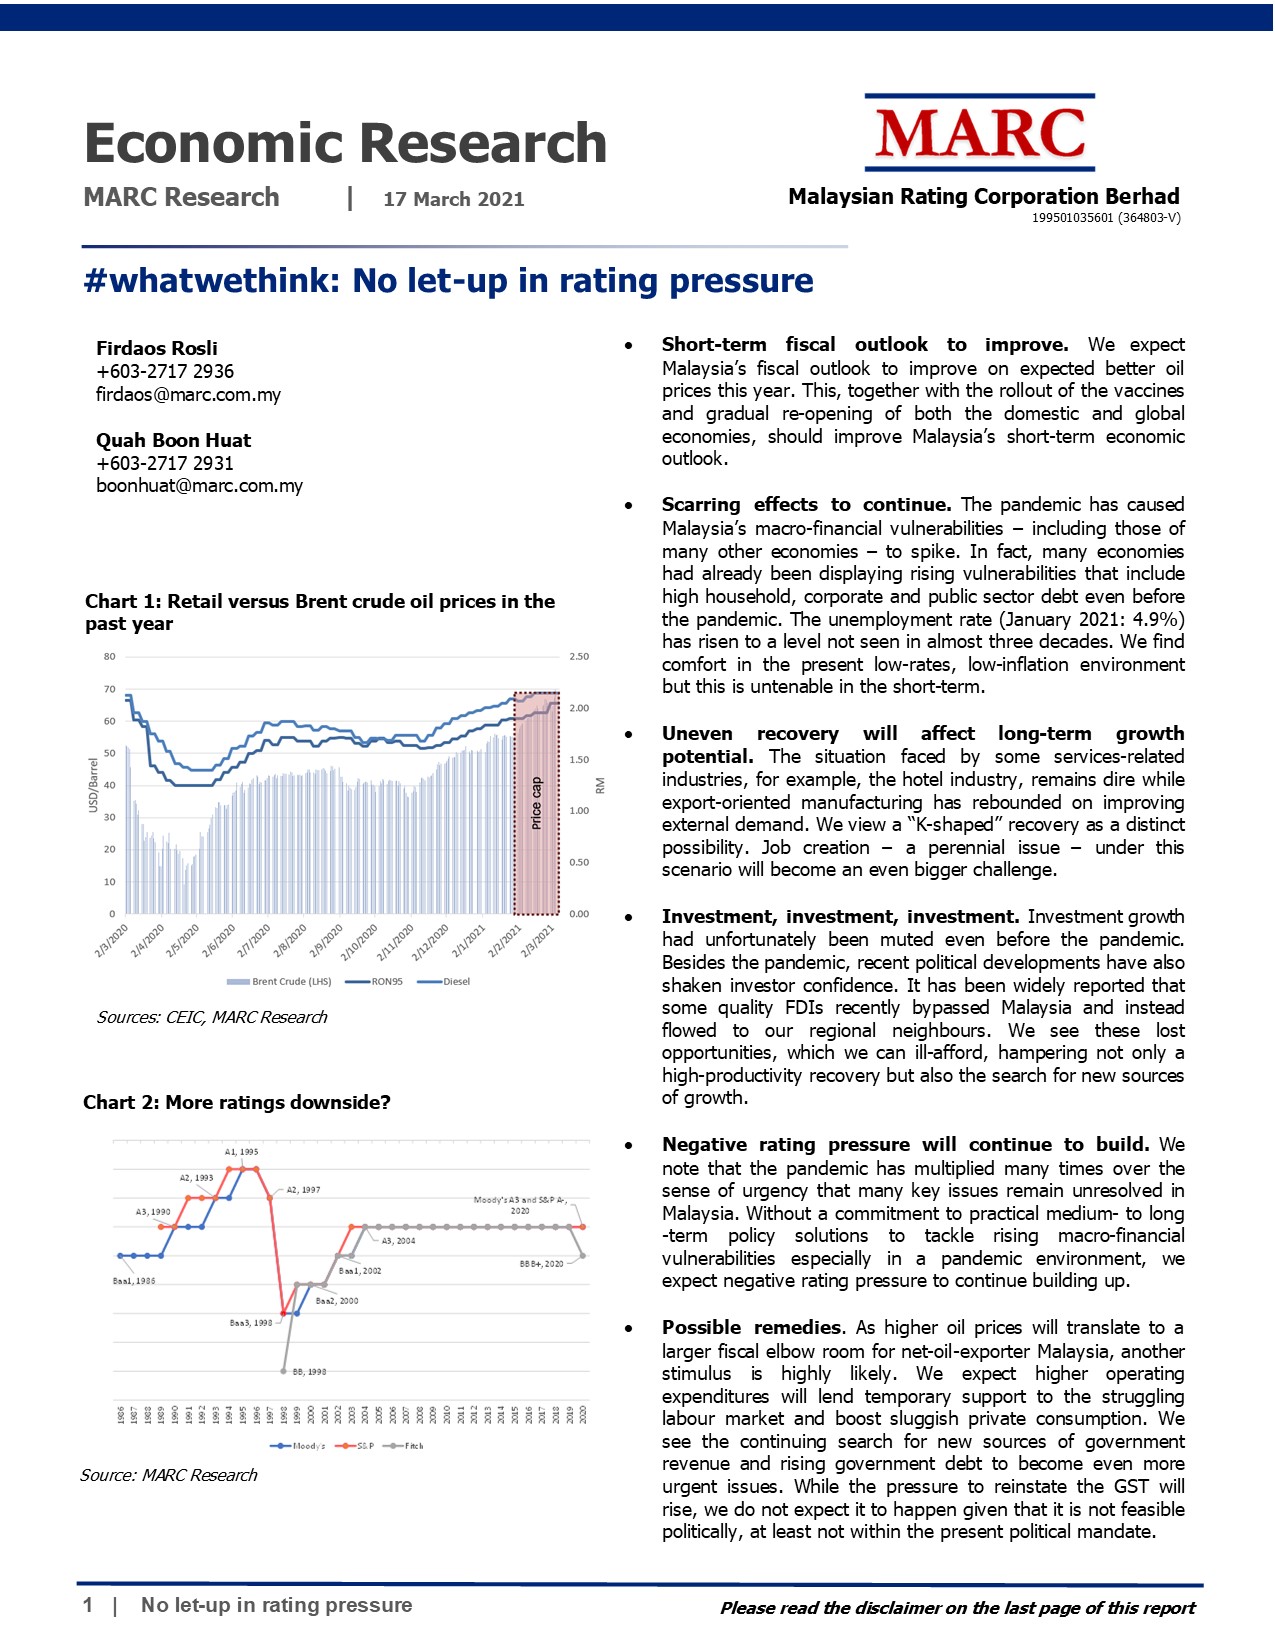 20210317 No let-up in rating pressure Page 1